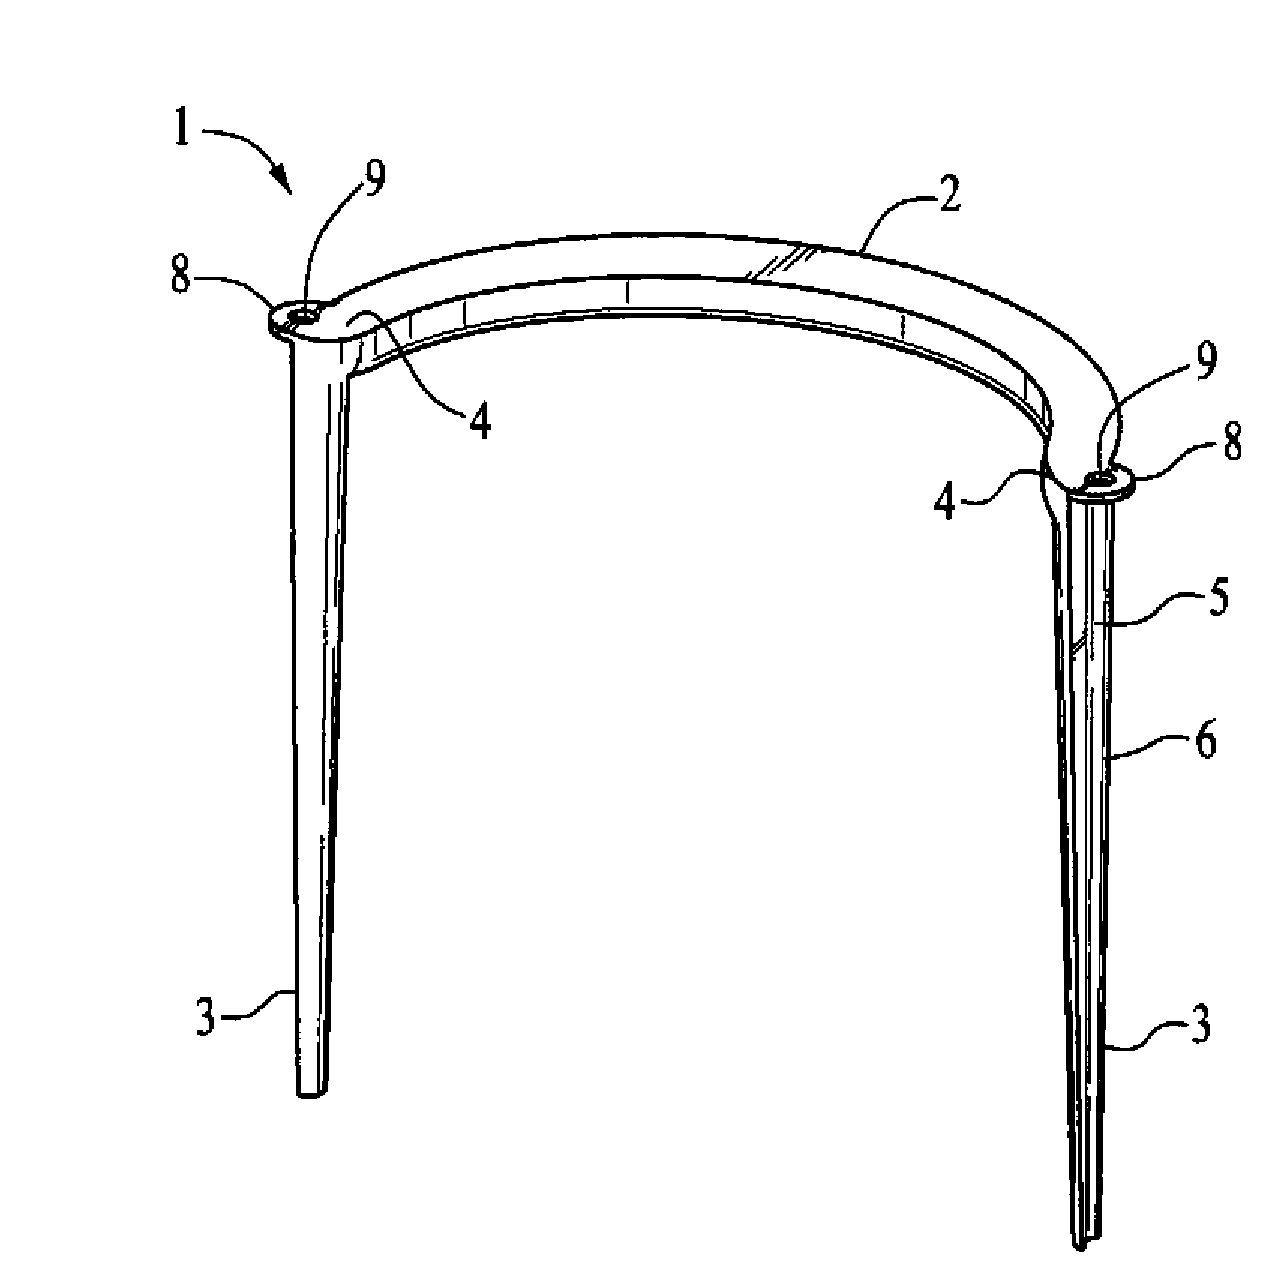 Surgical device, system and method of use thereof